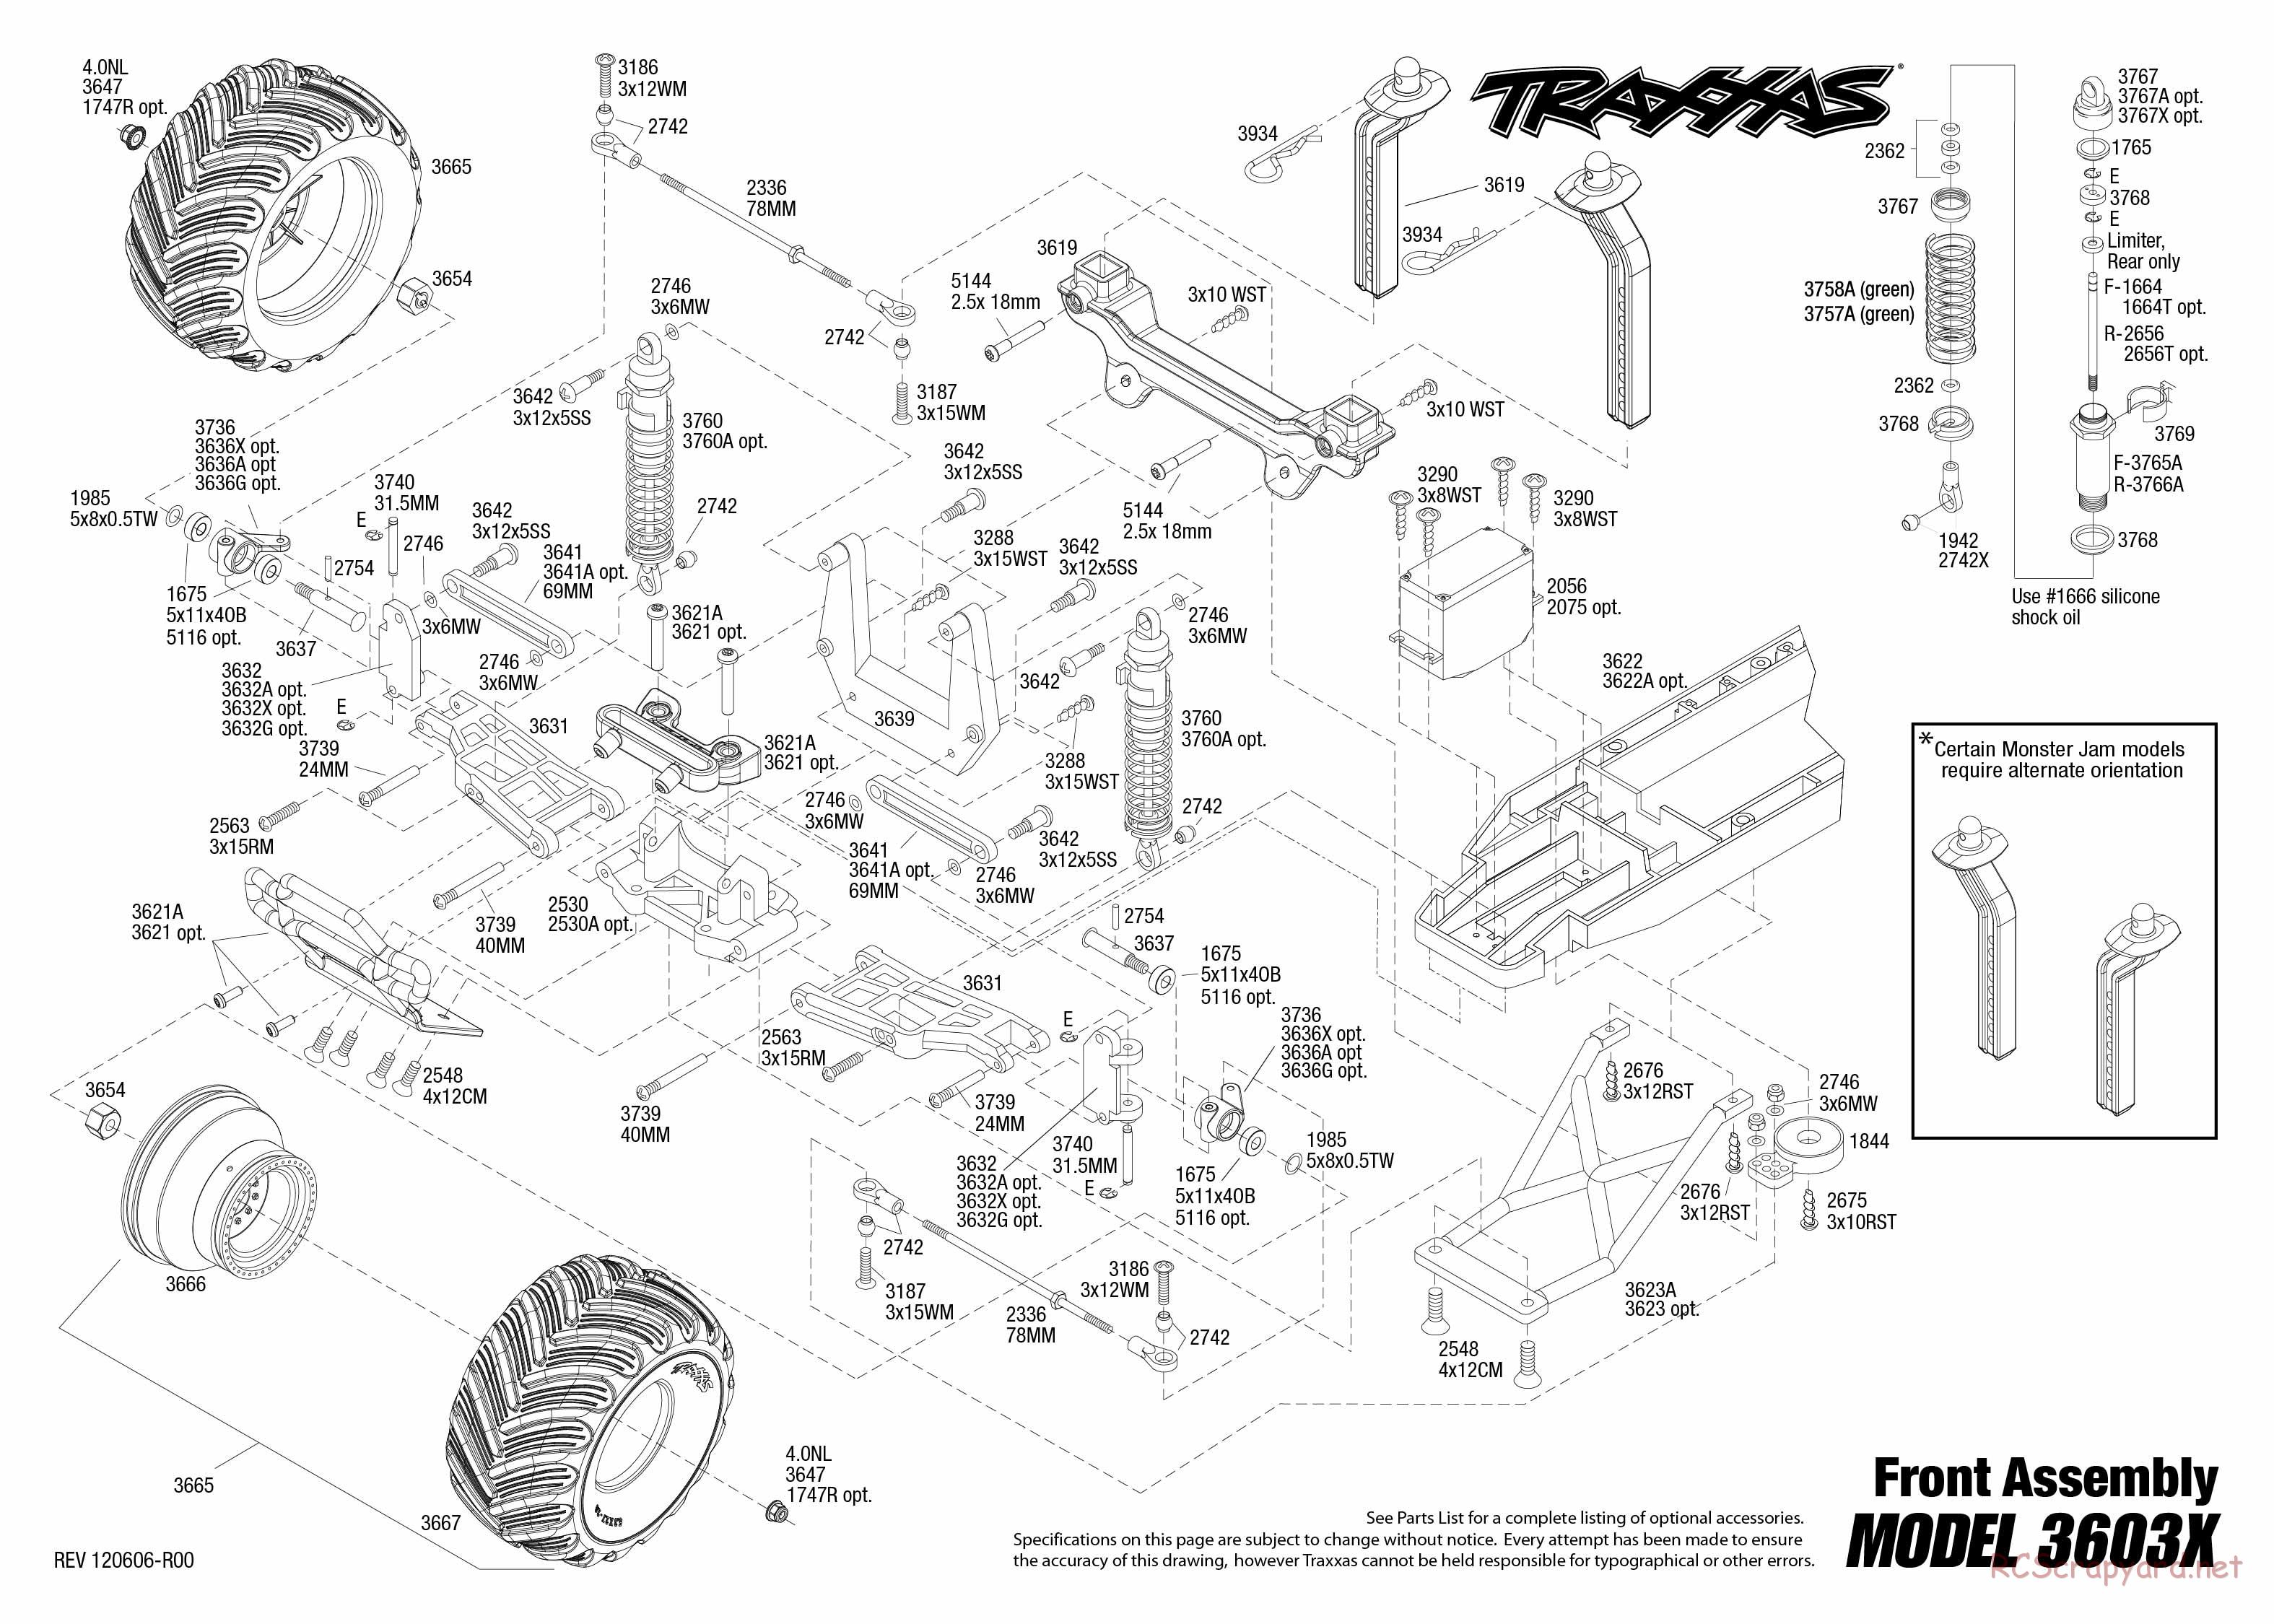 Traxxas - Monster Jam - Grave Digger 30th Anniversary Special - Exploded Views - Page 2